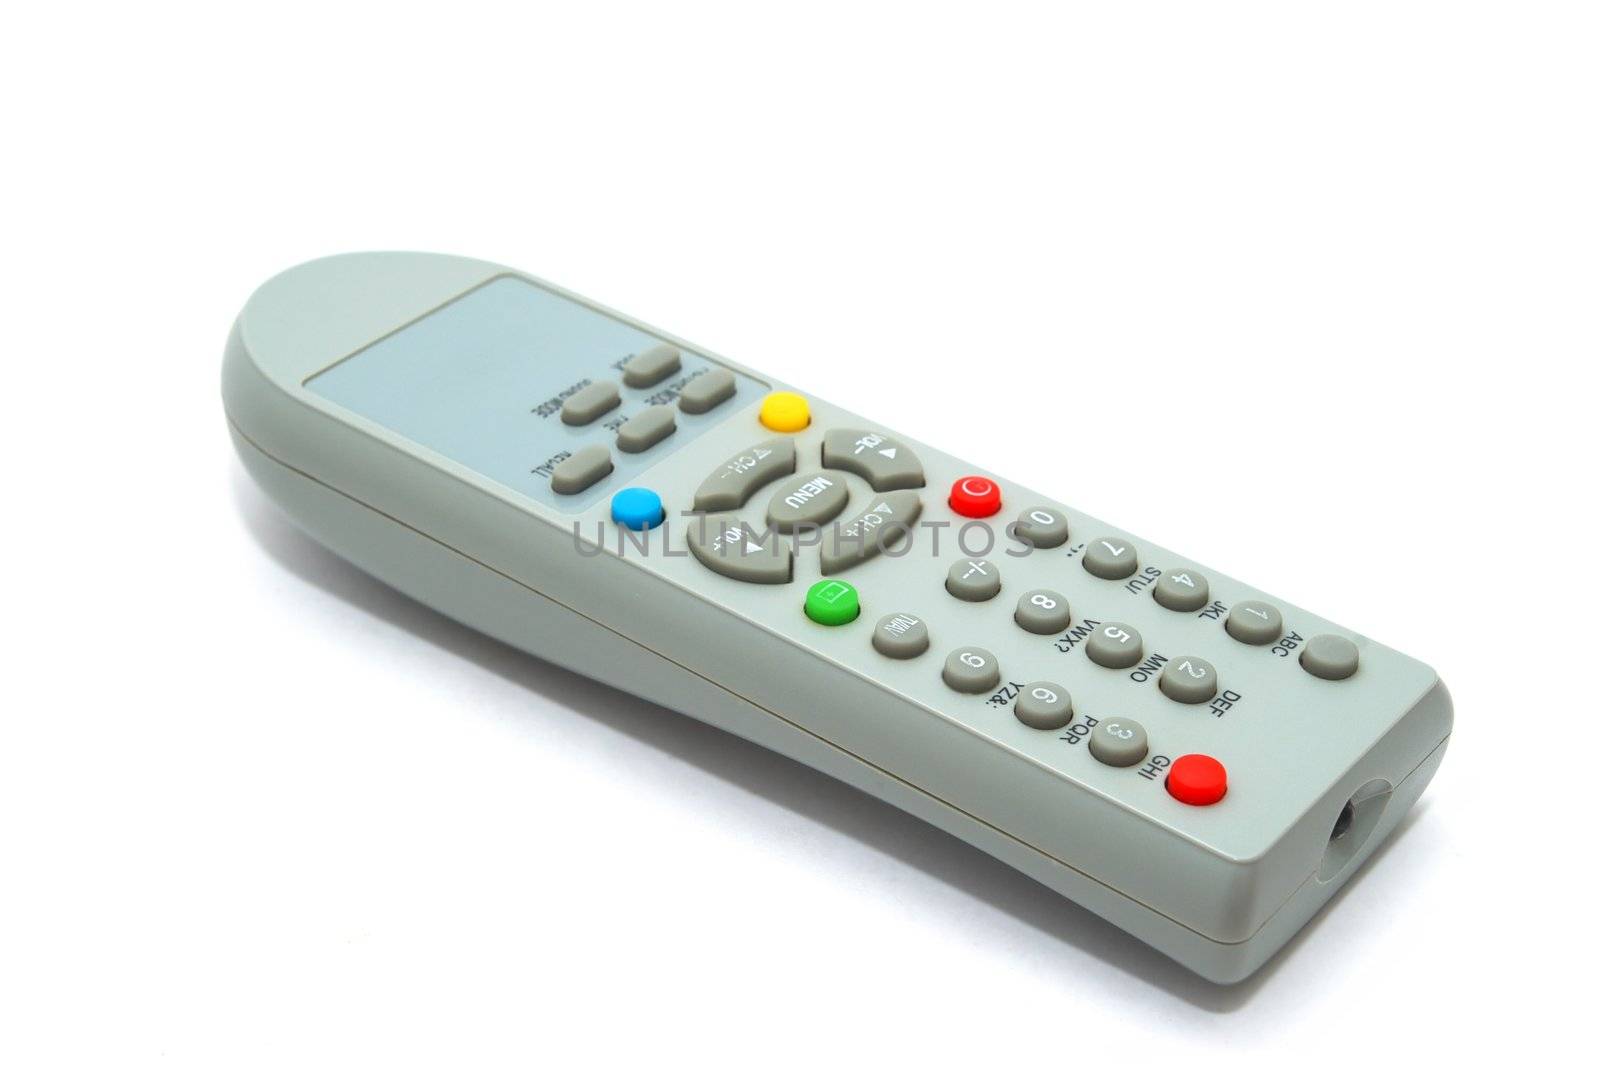 photo of the remote control on white background